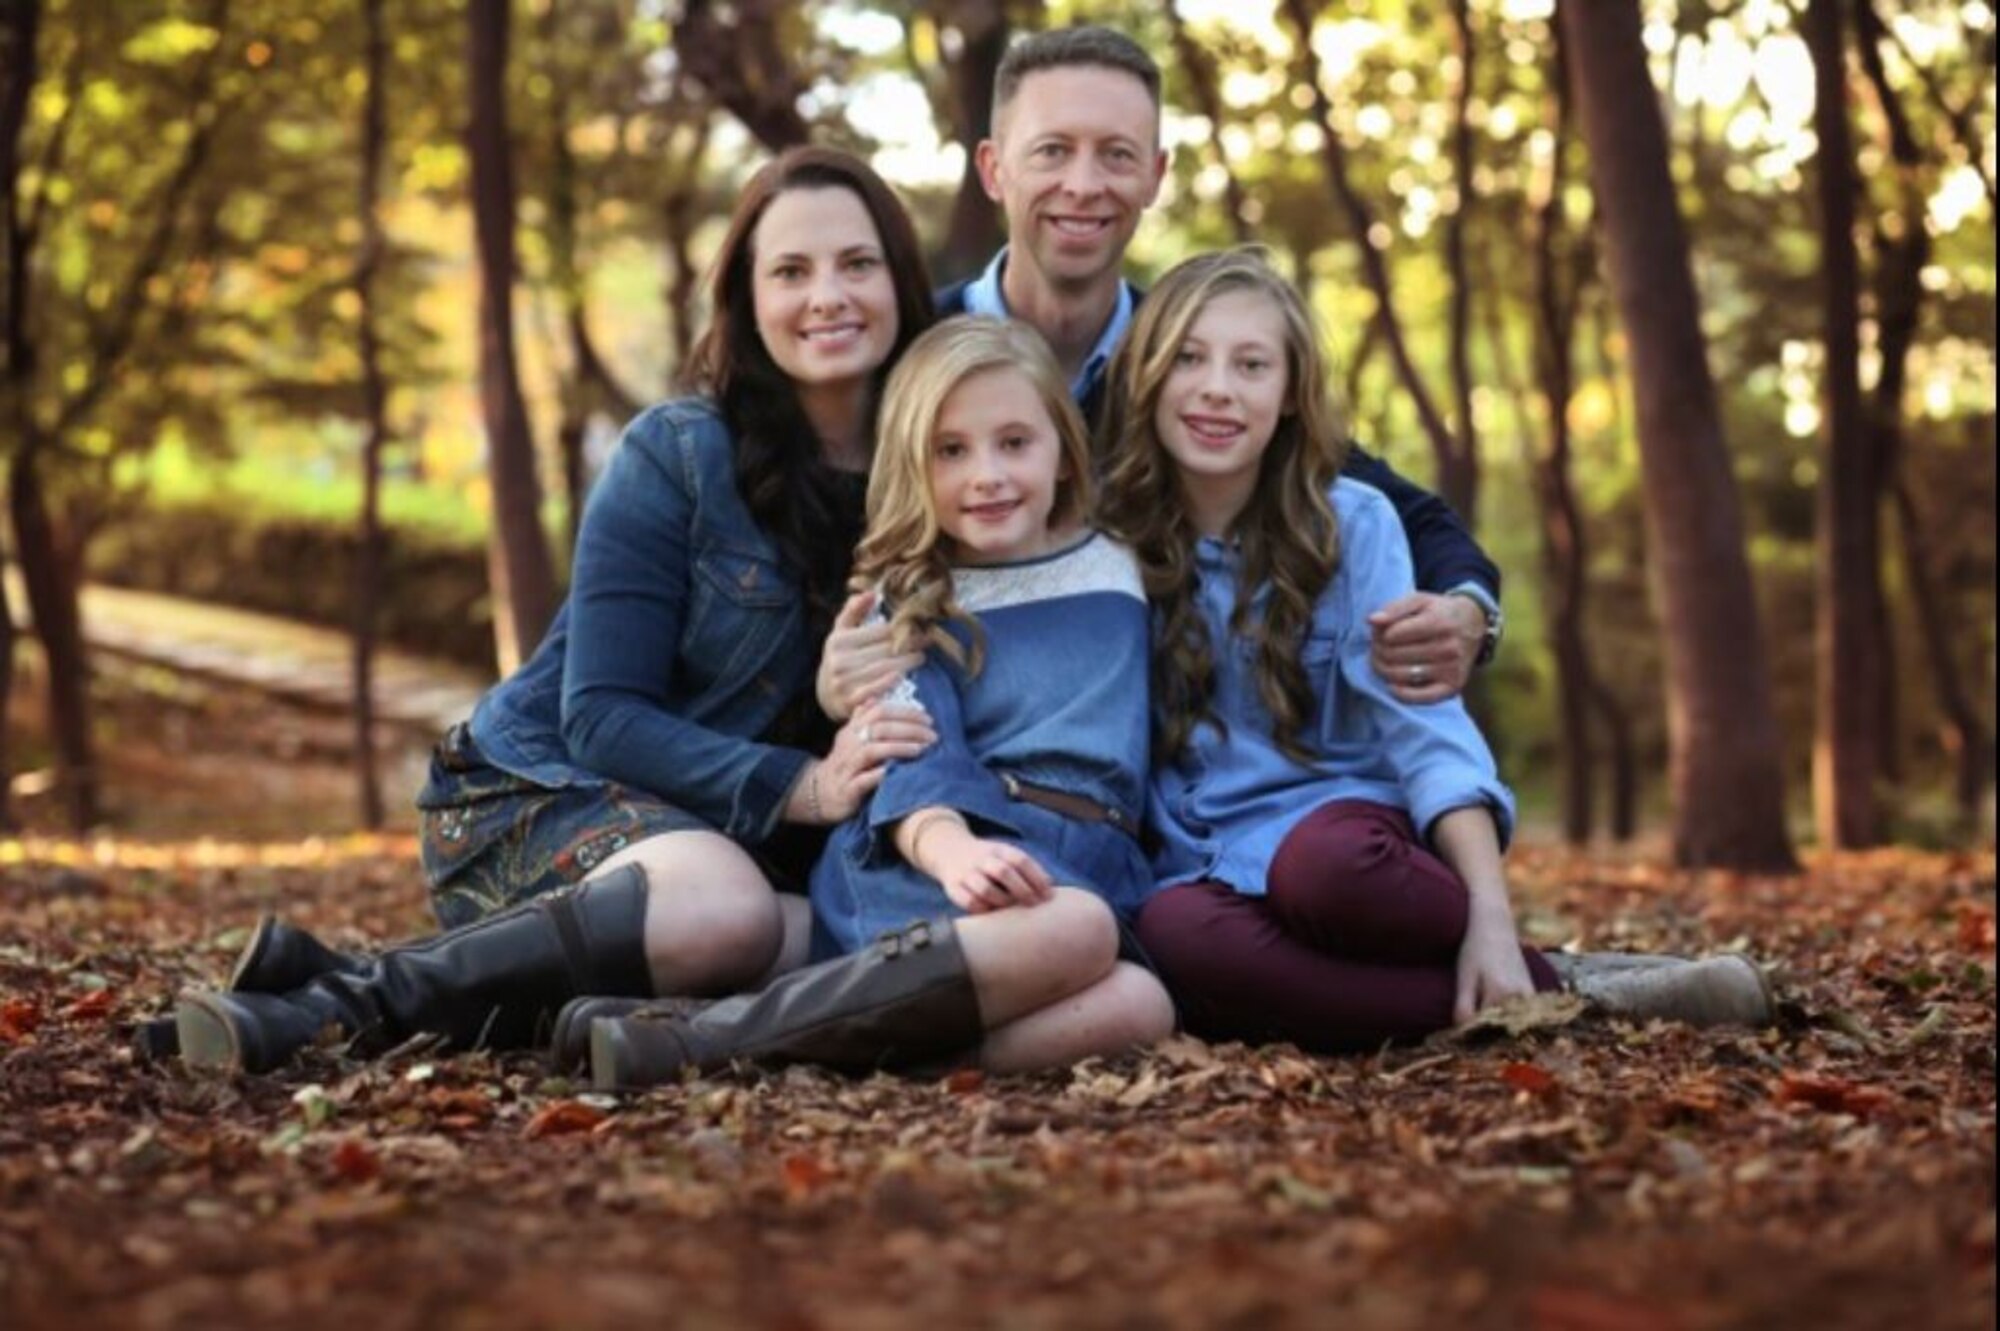 Joseph Meyer, 375th Air Mobility Wing vice commander, is pictured with his wife, Brandy, and two daughters, Eleanor and Evelyn. Over the span of his 21-year-career, Meyer has held four positions at Scott Air Force Base, including his current position as vice commander.